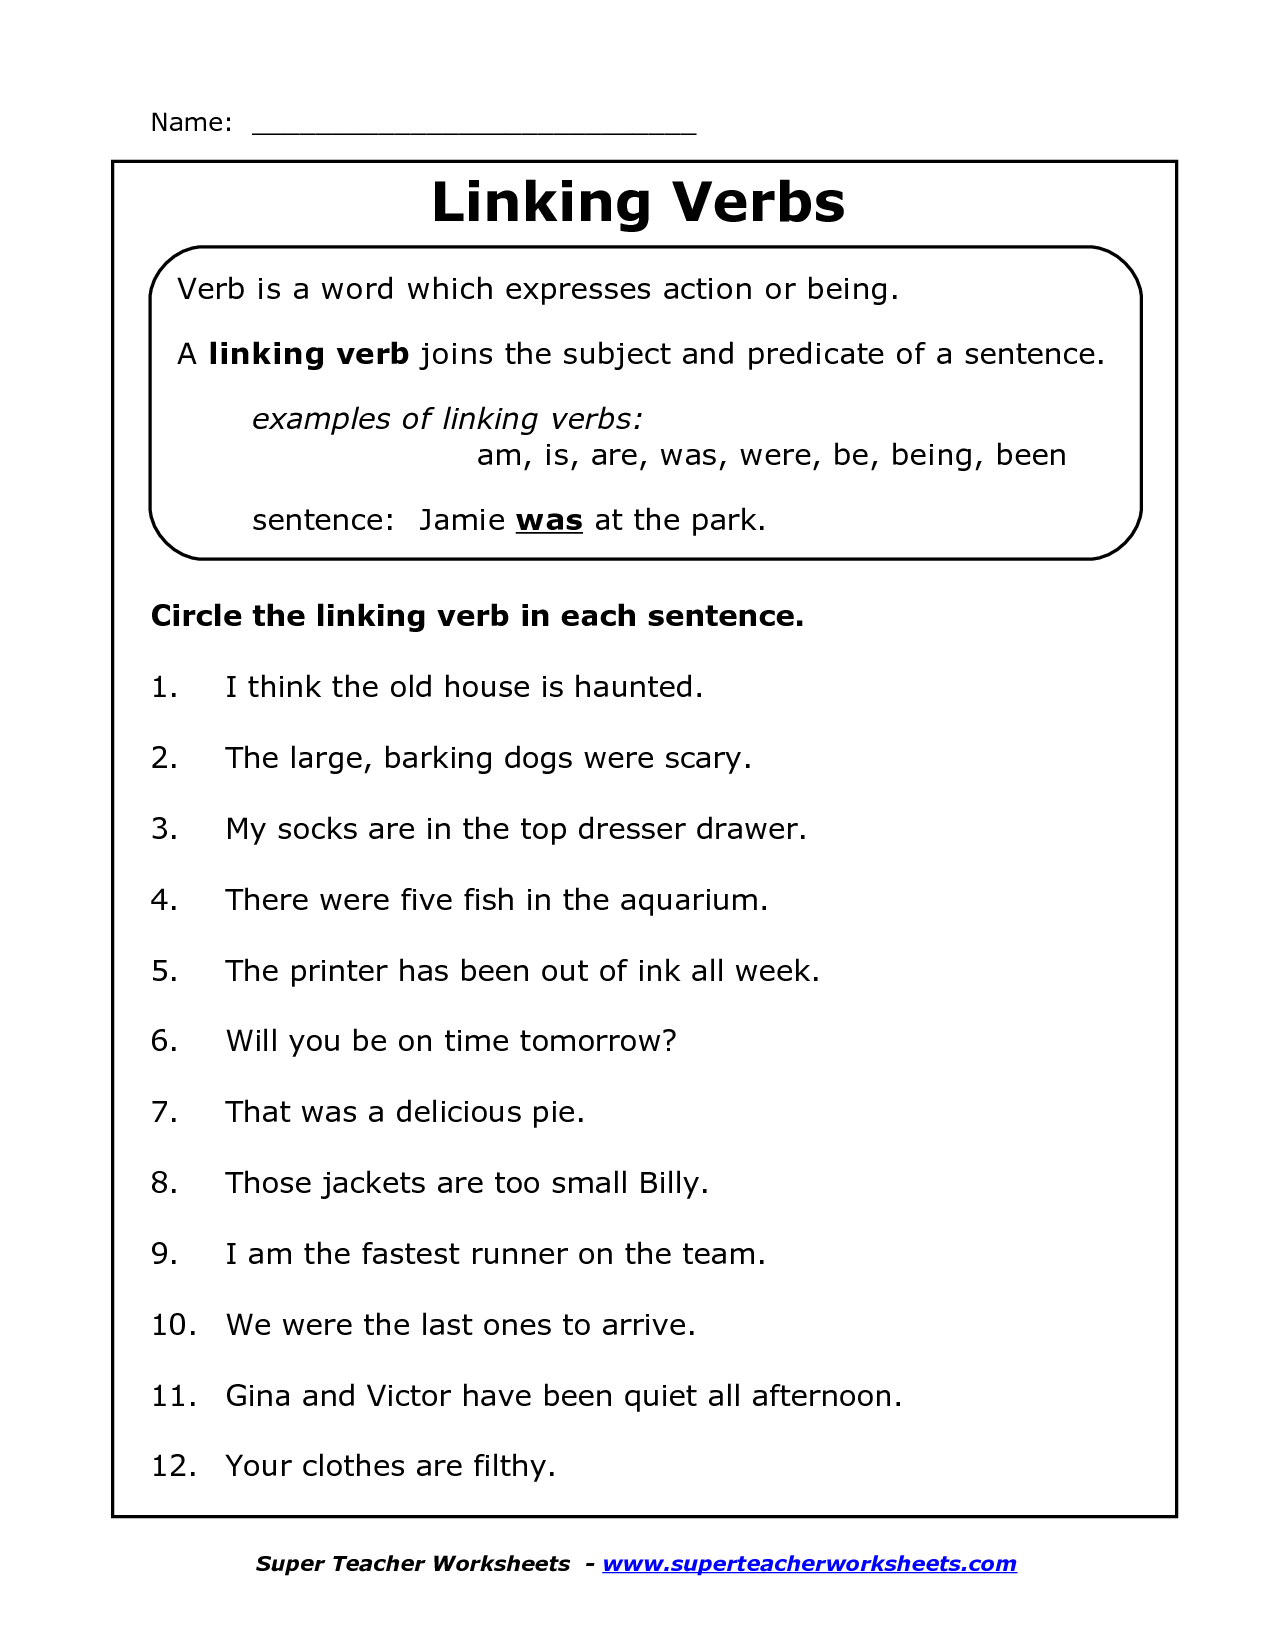 Worksheet Of Verbs For Class 4th